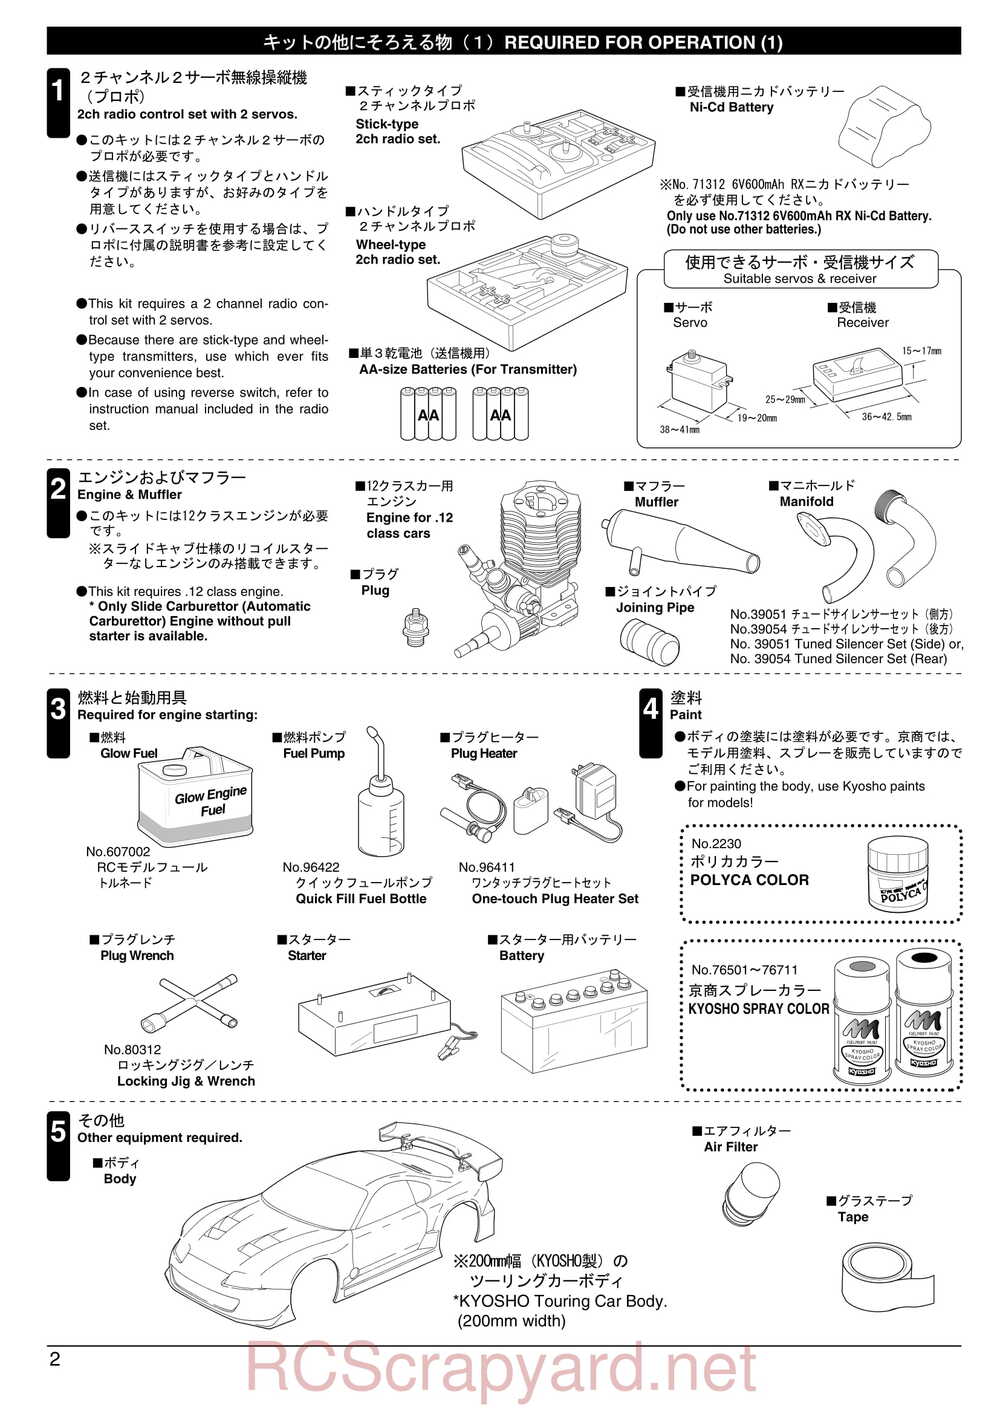 Kyosho - 31011 - V-One R - Manual - Page 02